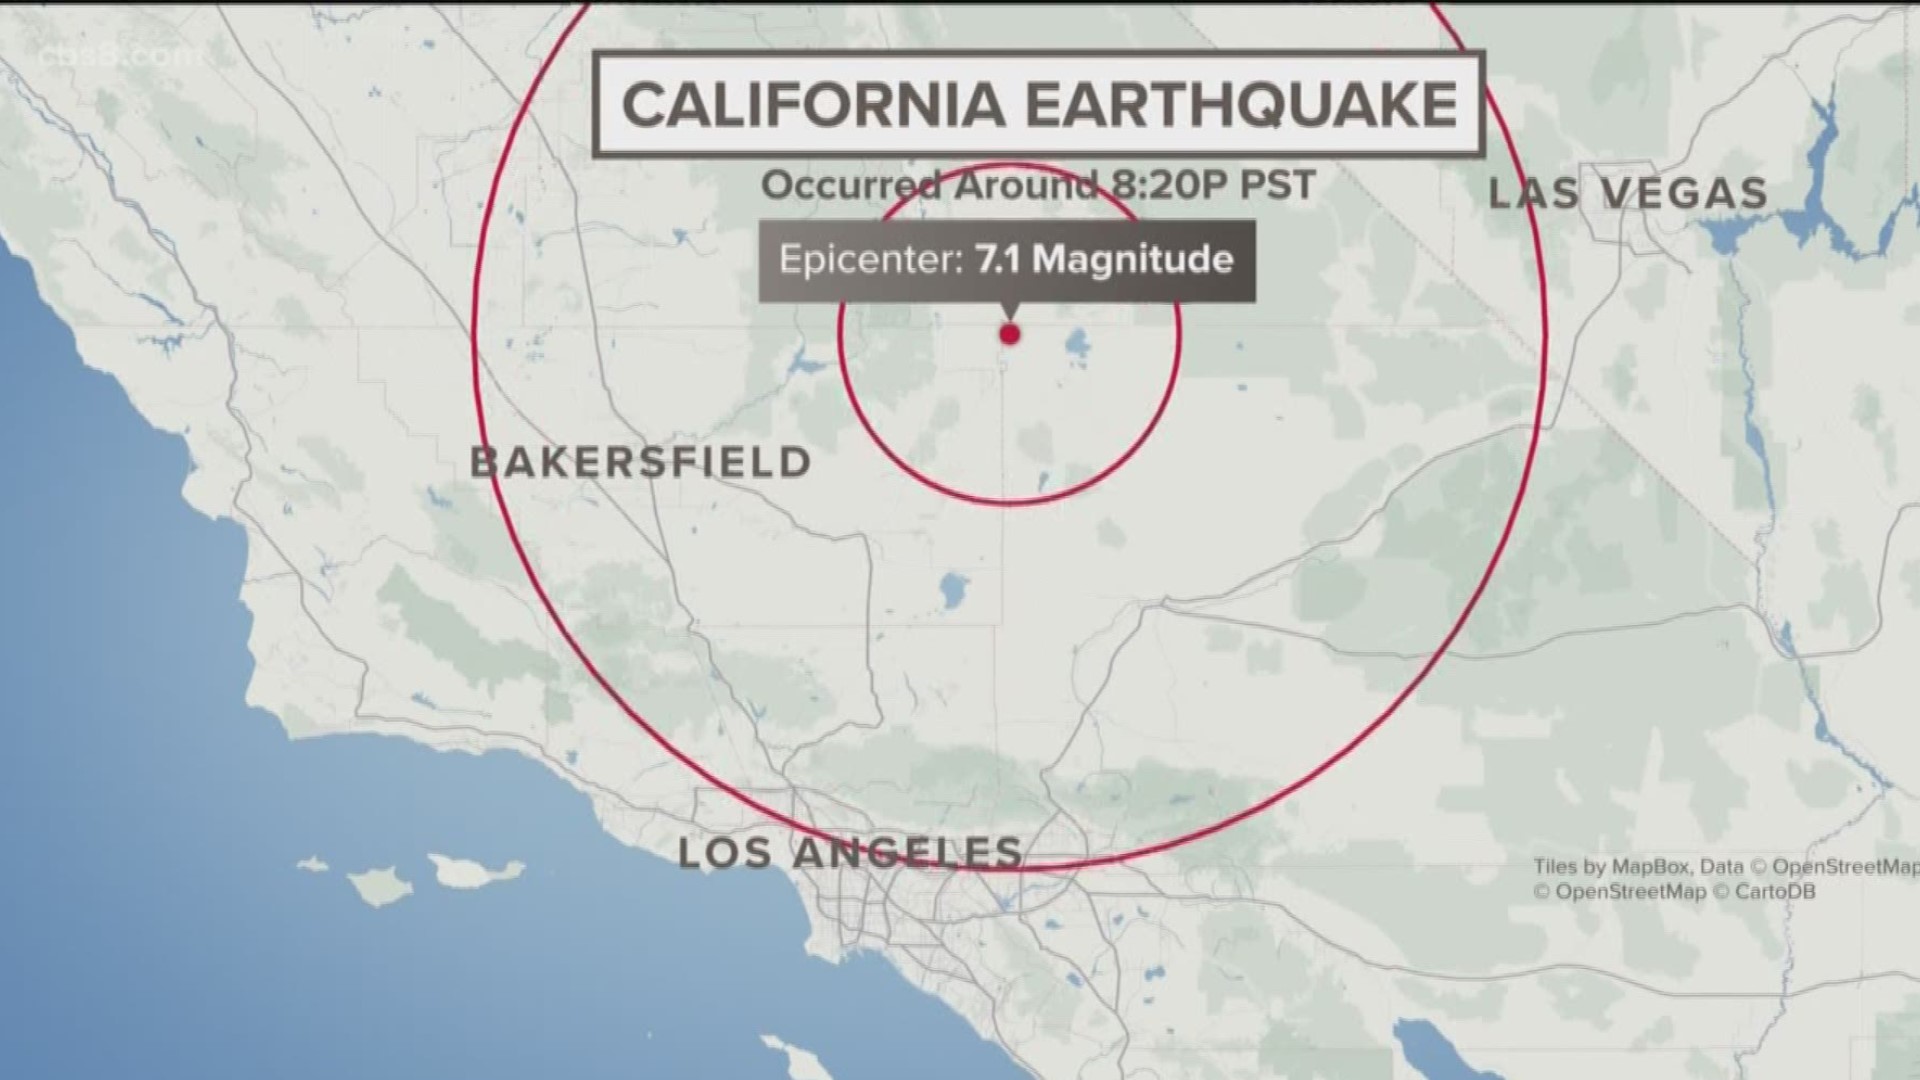 A magnitude 7.1 earthquake struck at 8:16 p.m. Friday night as part of an earthquake sequence of swarm in the Searles Valley, according to the U.S. Geological Survey. Friday's quake is just one day after the Fourth of July earthquake in the same region which measured 6.4.